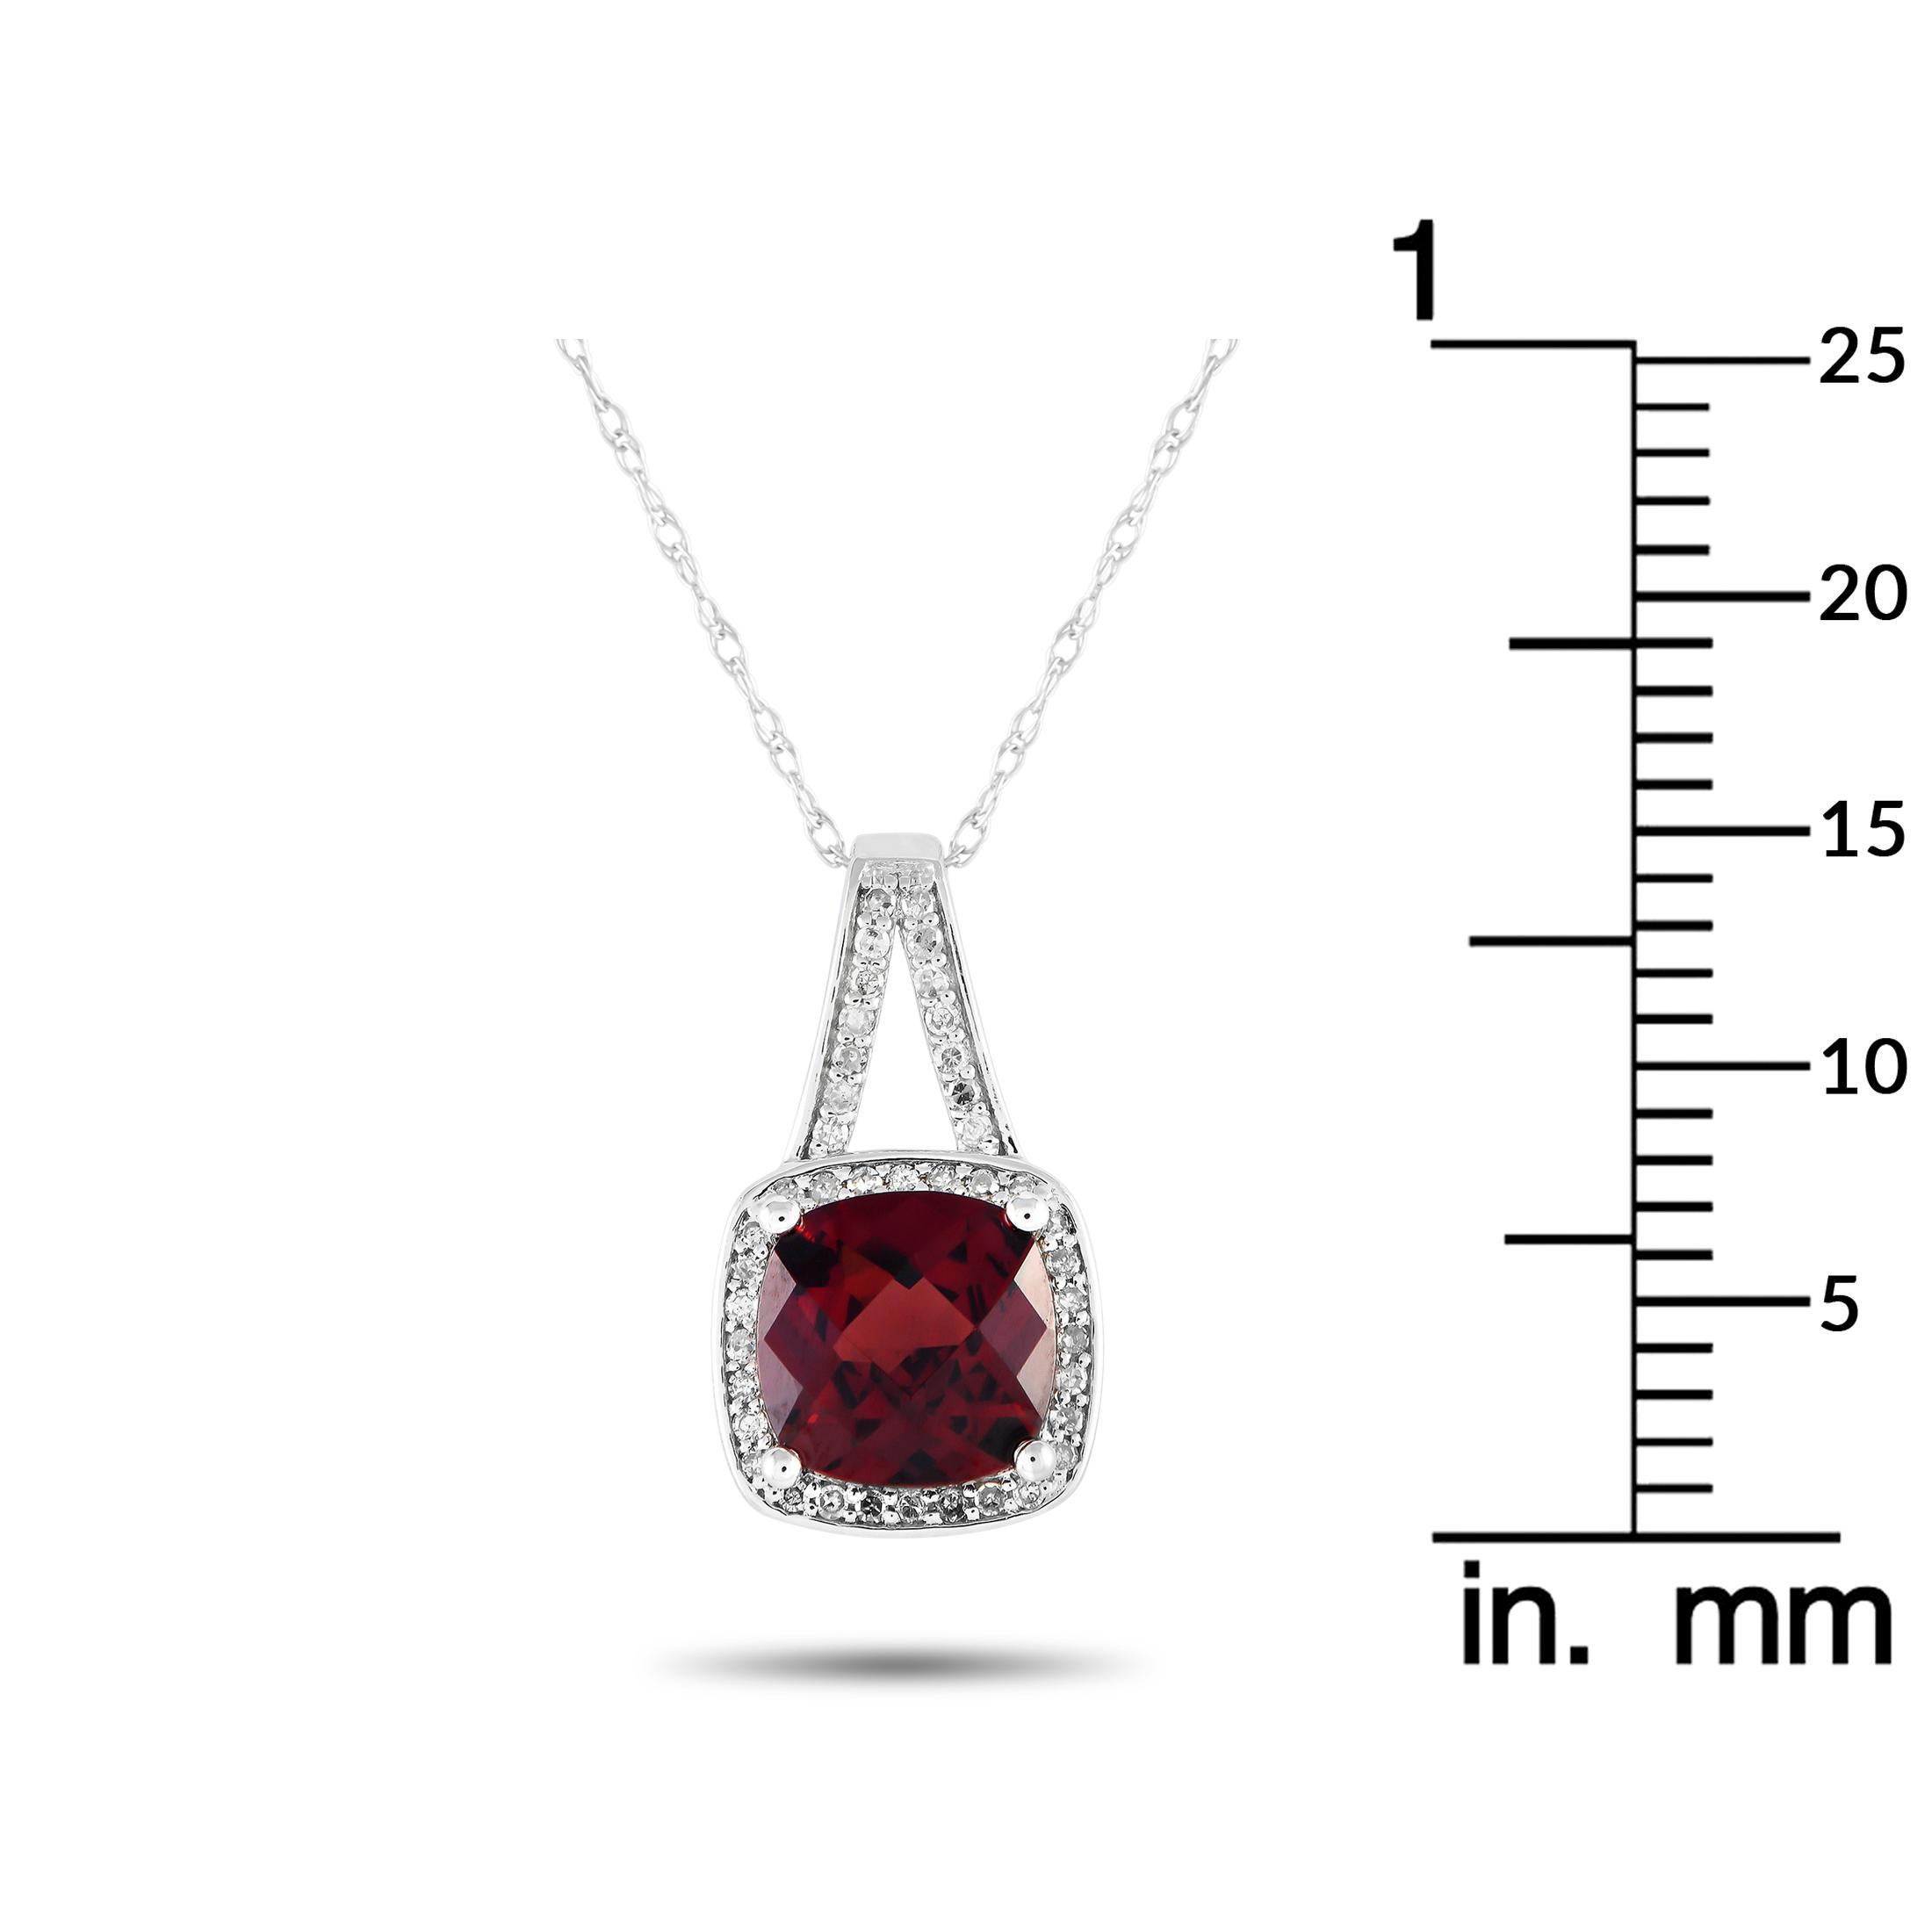 LB Exclusive 14K White Gold 0.12ct Diamond and Garnet Necklace PD4-16273WGA In New Condition For Sale In Southampton, PA